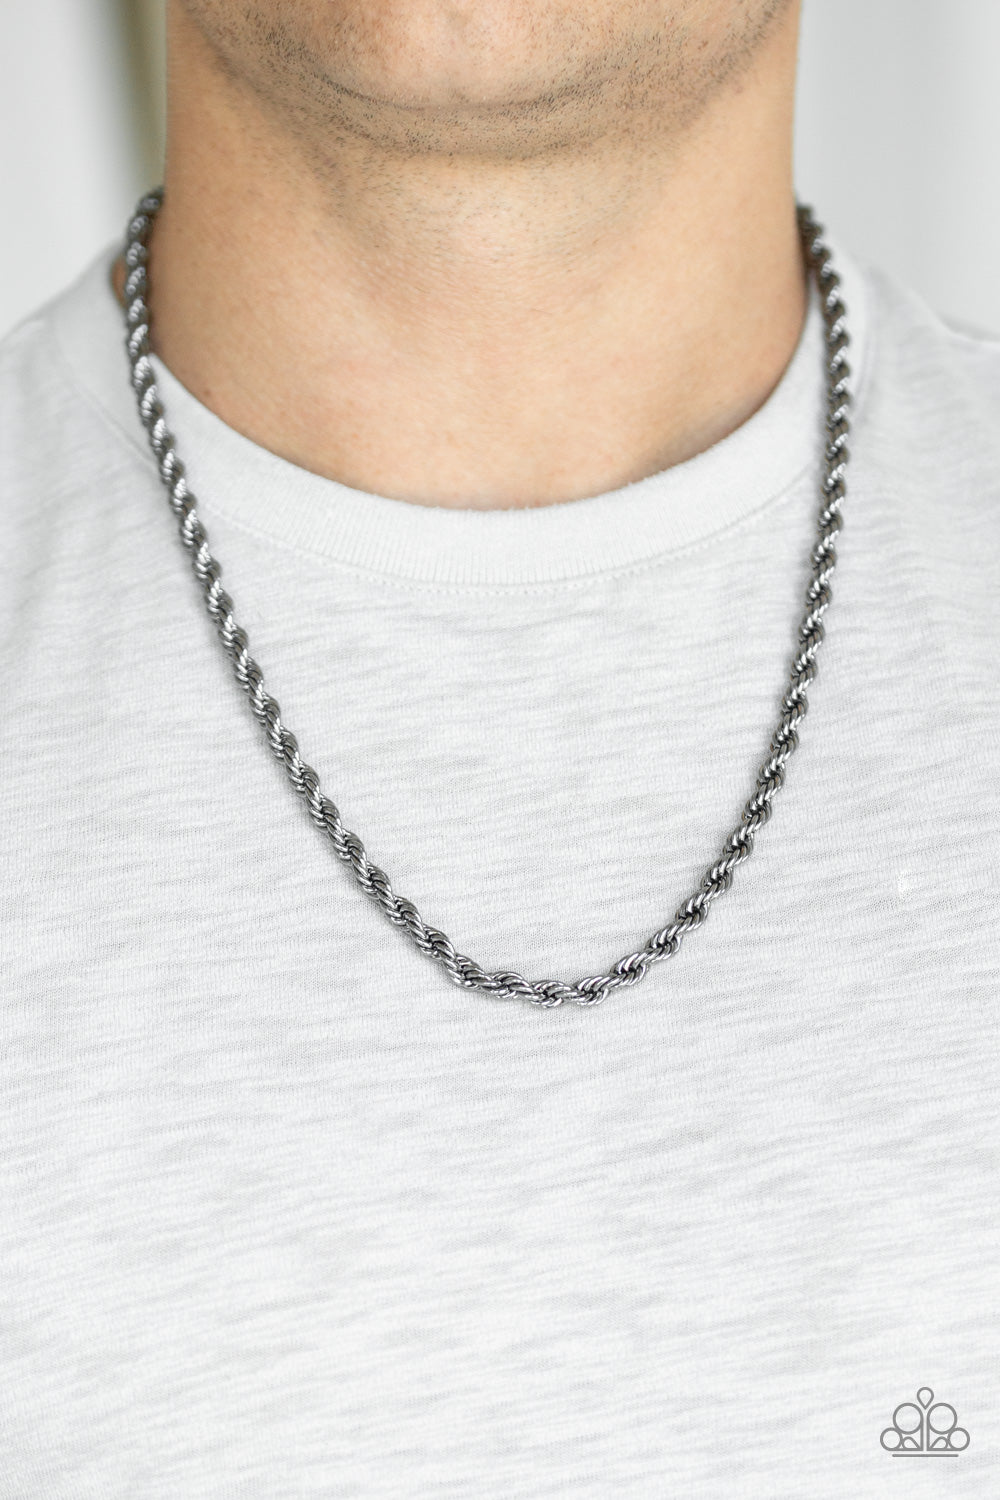 Double Dribble Black Urban Necklace - Paparazzi Accessories.  Brushed in a high-sheen finish, a thick gunmetal rope chain drapes across the chest for a classic, upscale look. Features an adjustable clasp closure.  All Paparazzi Accessories are lead free and nickel free!  Sold as one individual necklace.